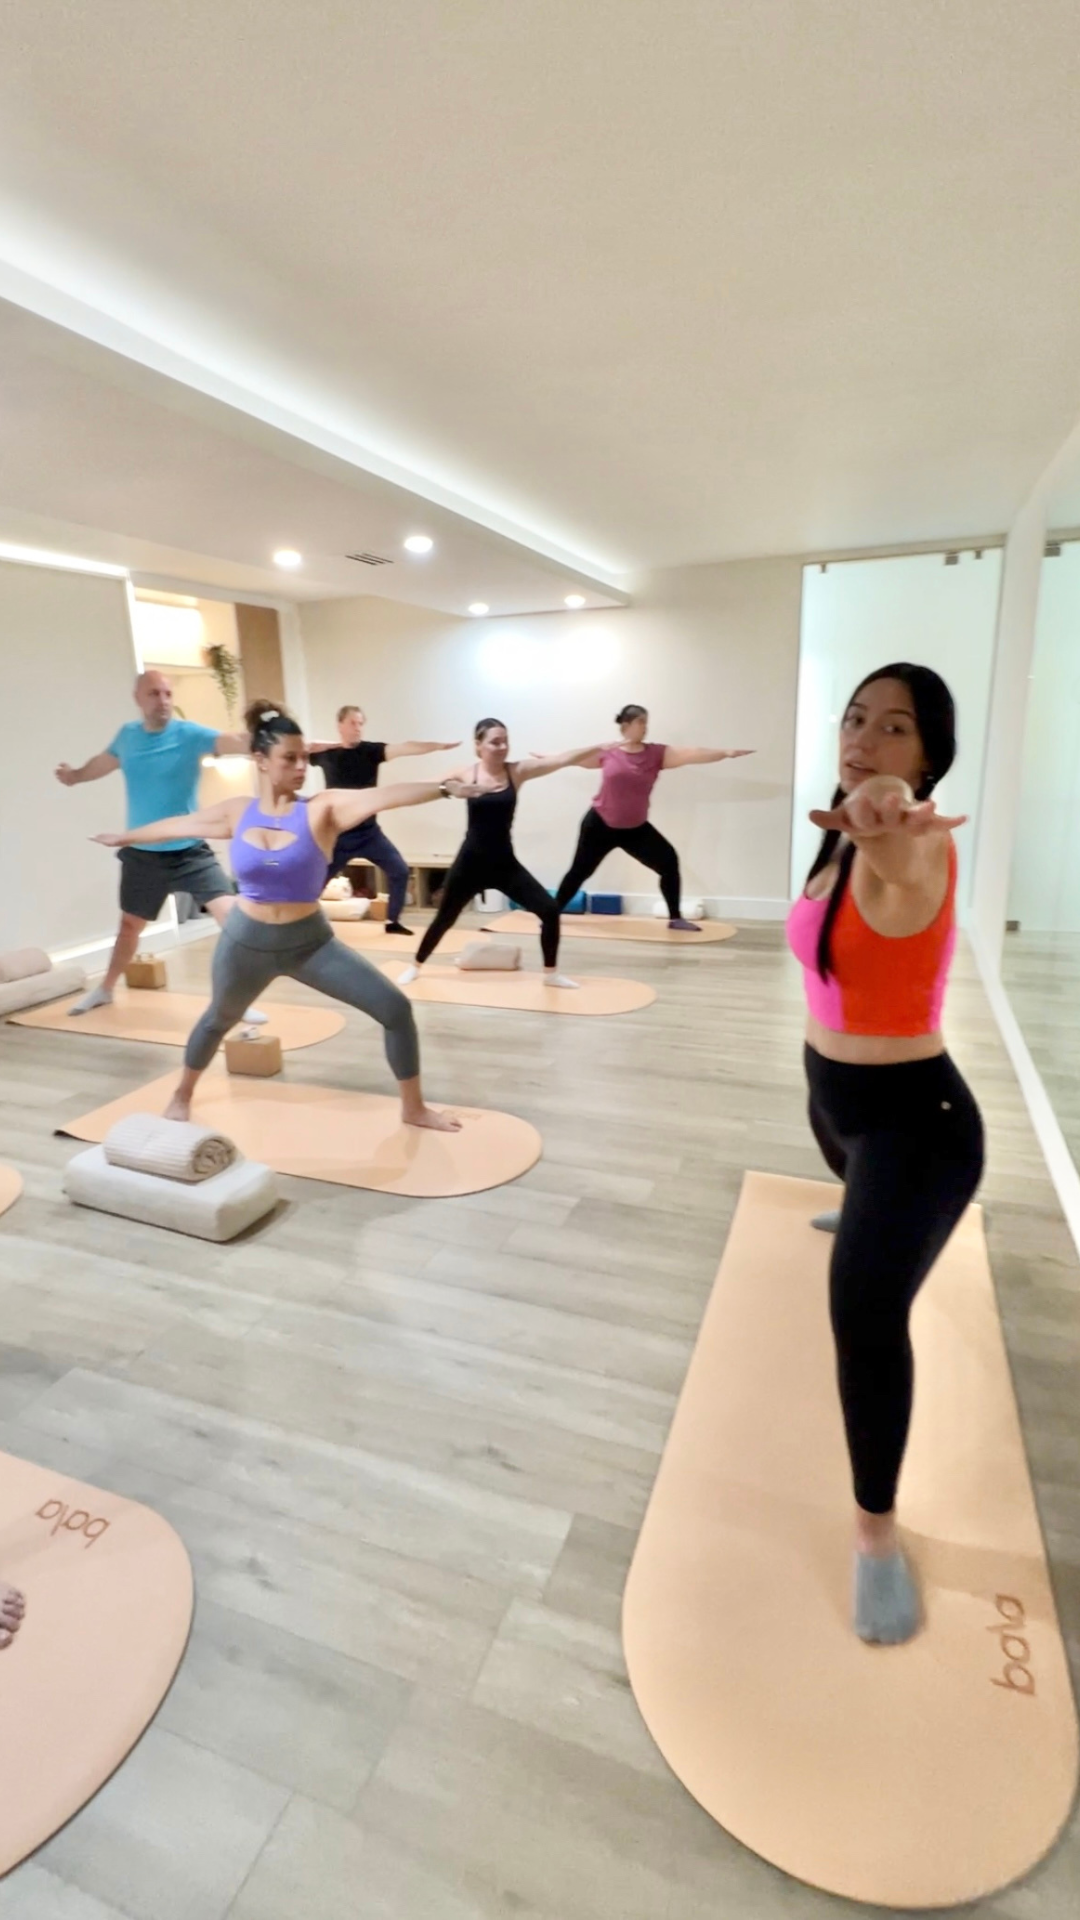 Coral Gables Yoga Studio offering Hypnotic Flow class taught by Paola Mendez of Coral Gables Love